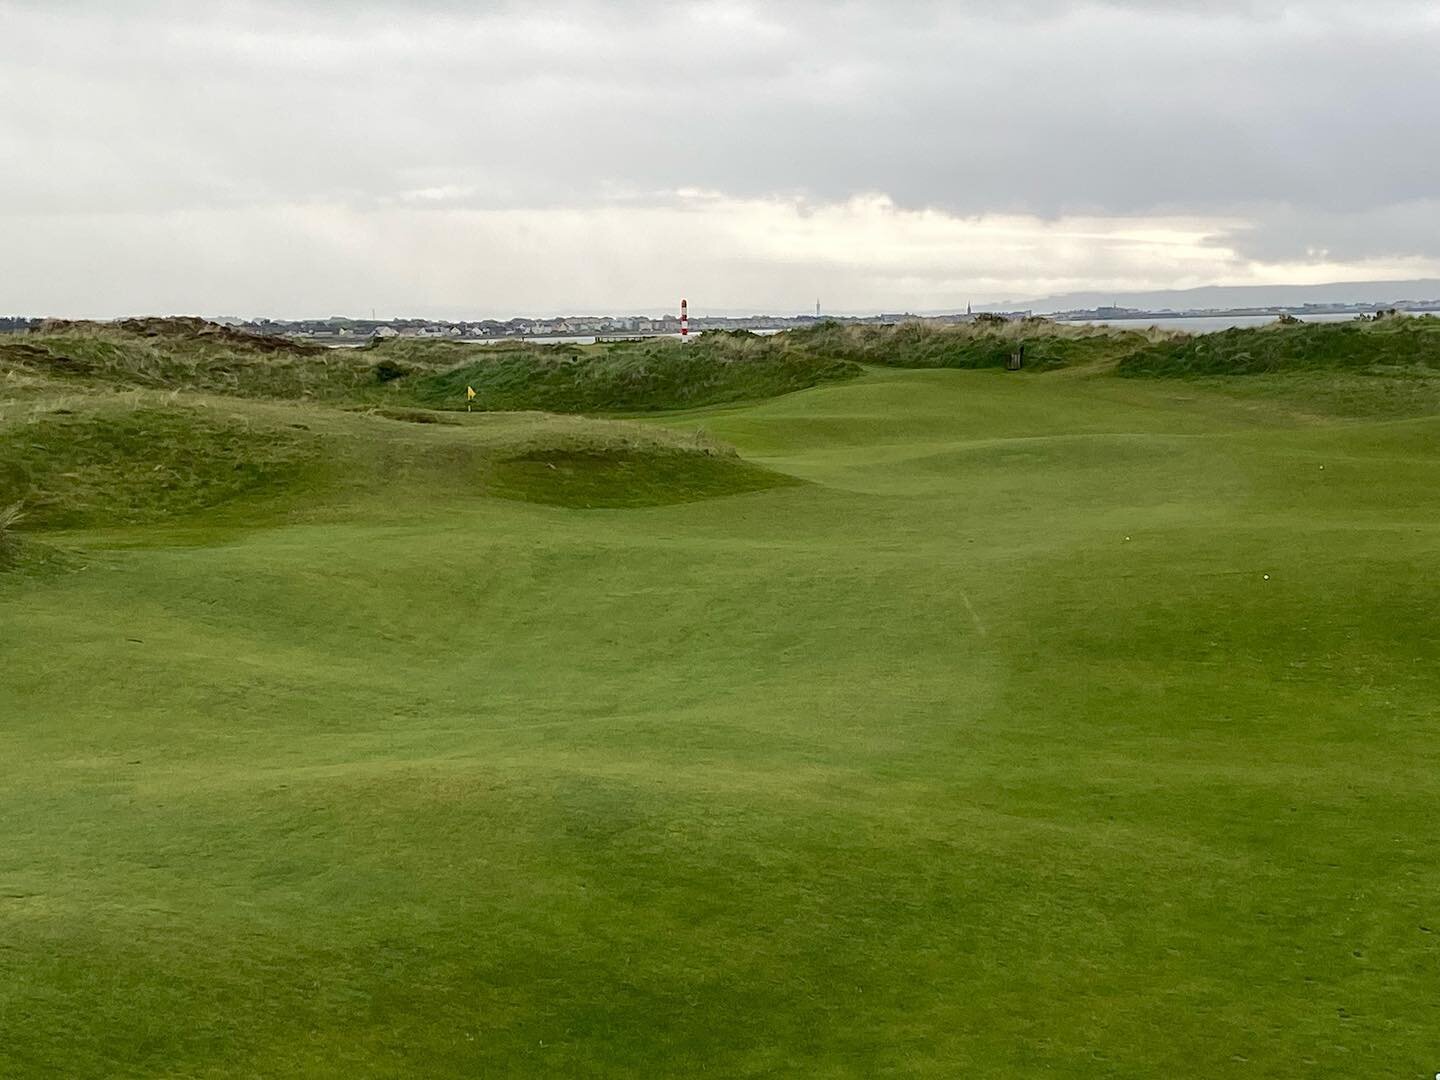 Western Gailes Golf Club. What a belter, a proper club and a proper course. True links. Thank you for supporting Alzheimer&rsquo;s Society #westerngailes. Blogpost up now at Thelinksgolfer.com